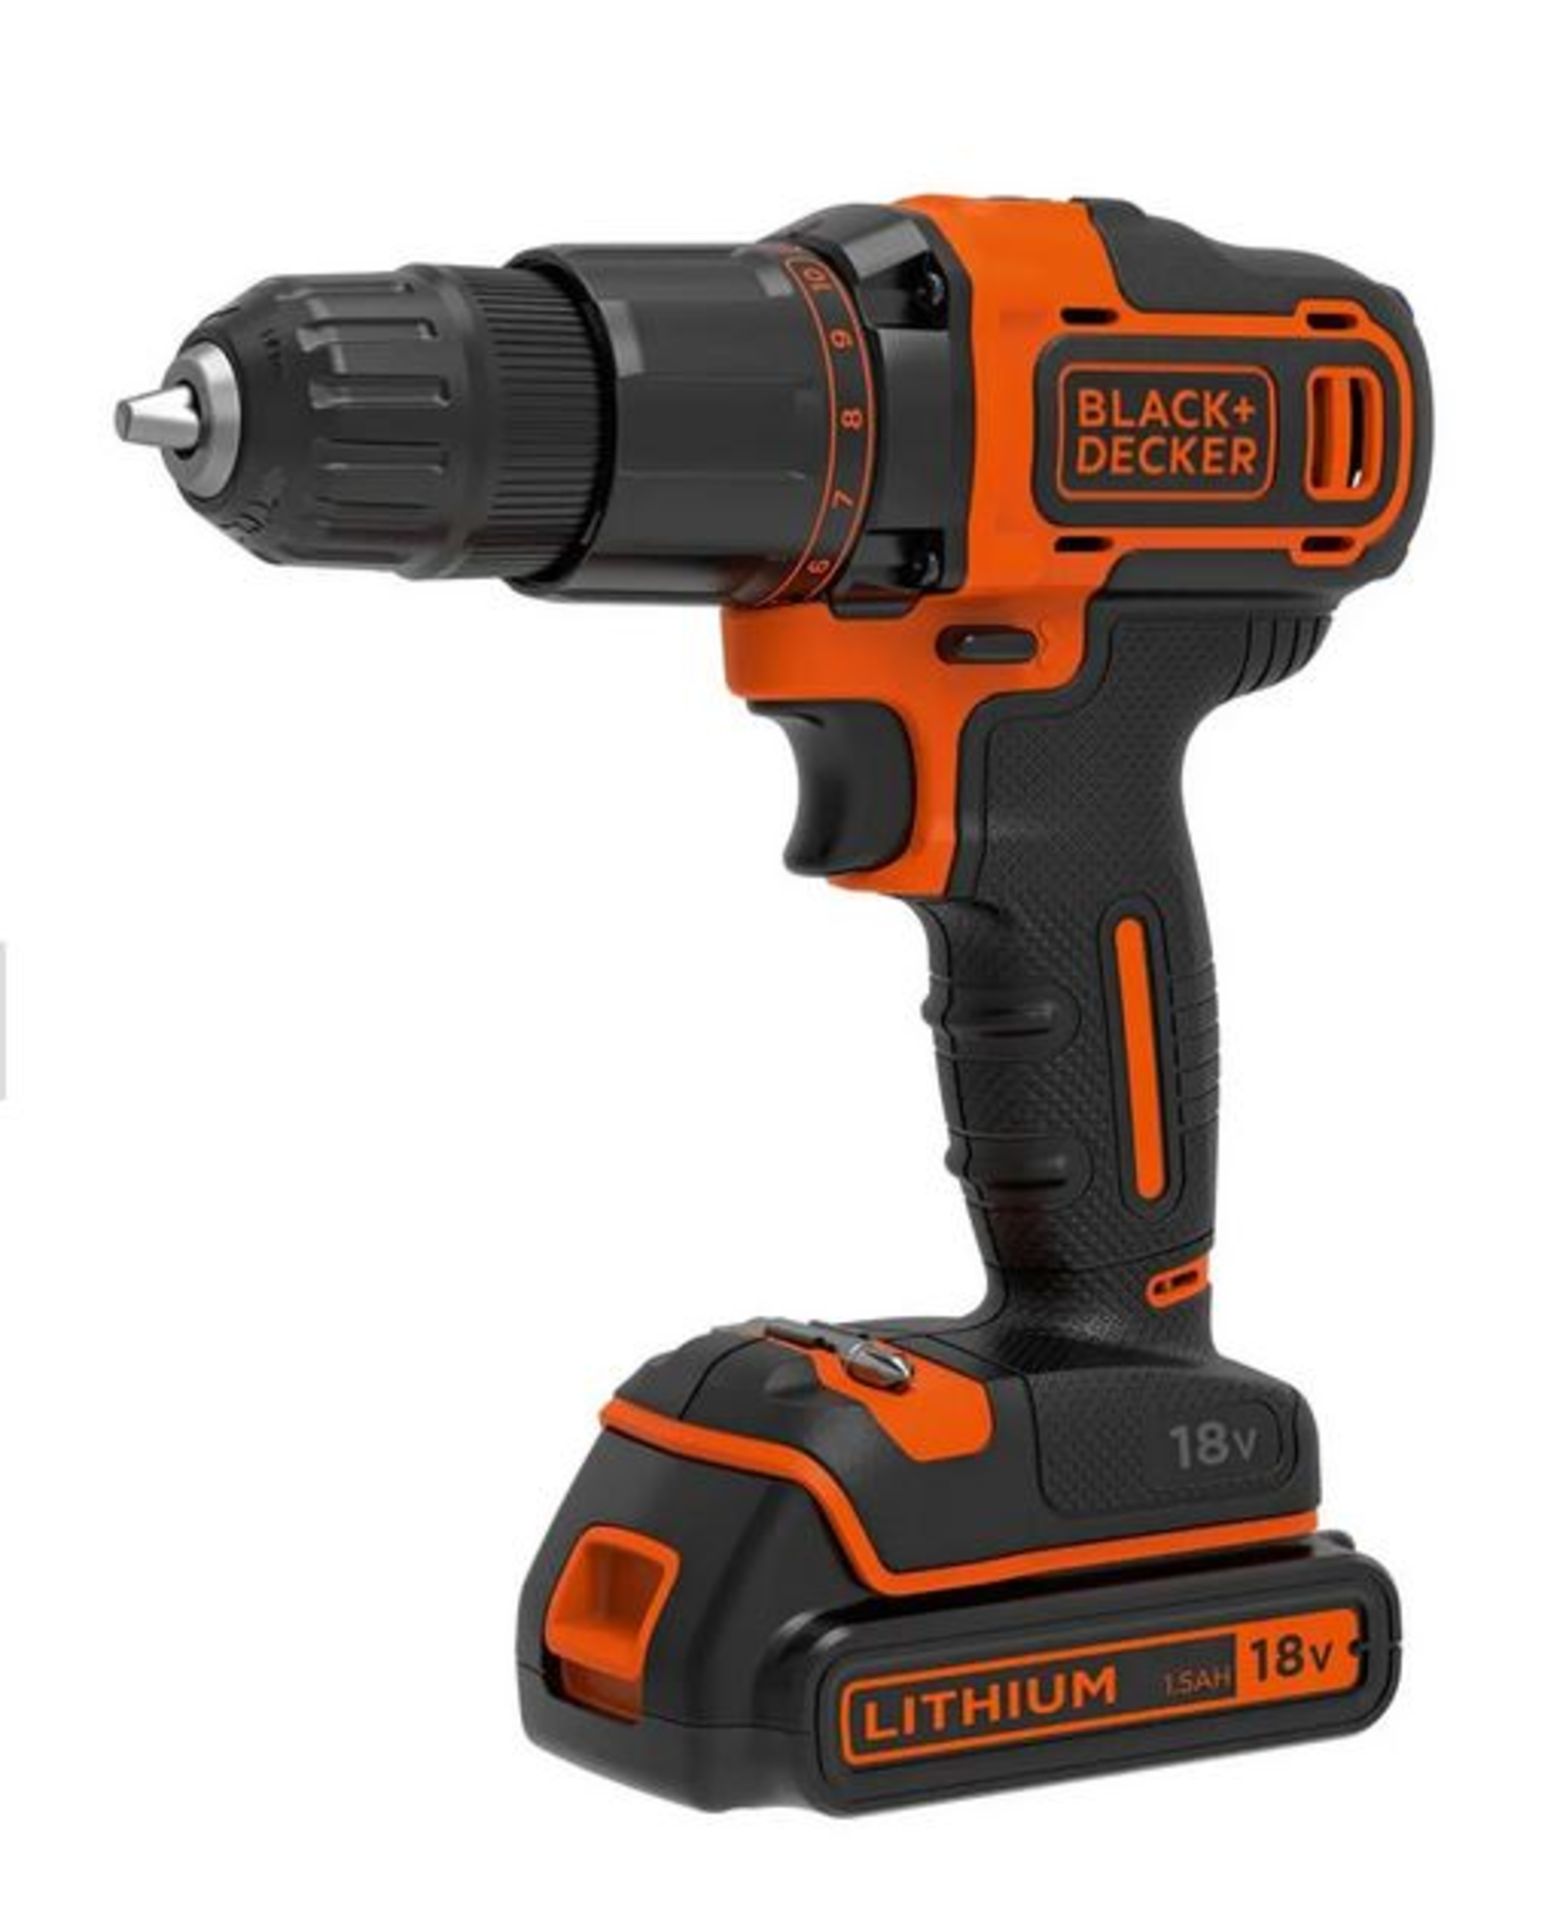 (R15B) 2x Black & Decker 18V 2 Gear Hammer Drill With Carry Case. Both Units Have Battery & Charger - Image 2 of 3